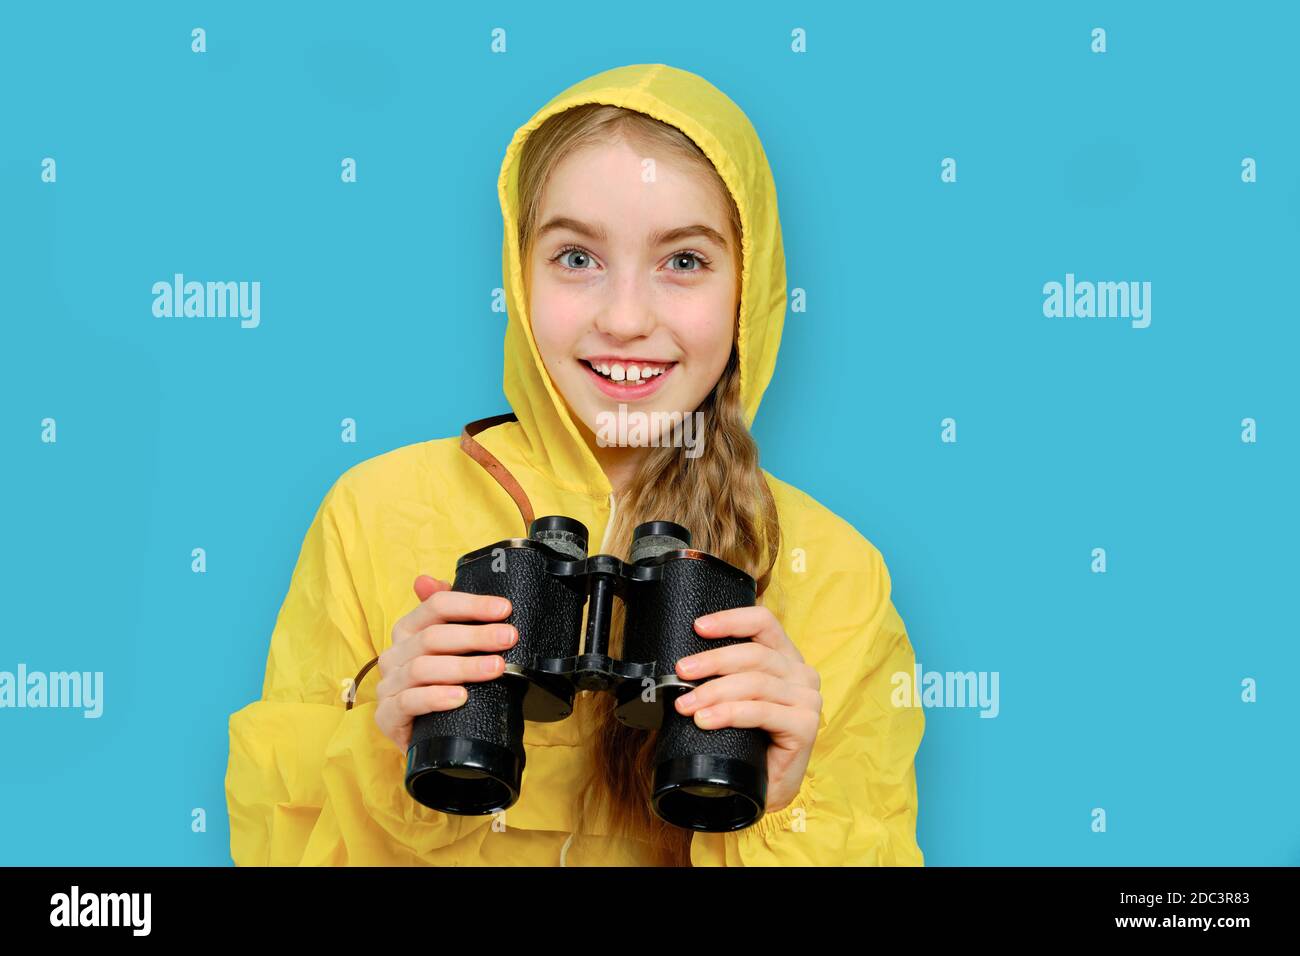 Caucasian joyful girl in a yellow jacket holds binoculars in her hands. hike idea and camping equipment.Studio isolated portrait on blue background. Stock Photo